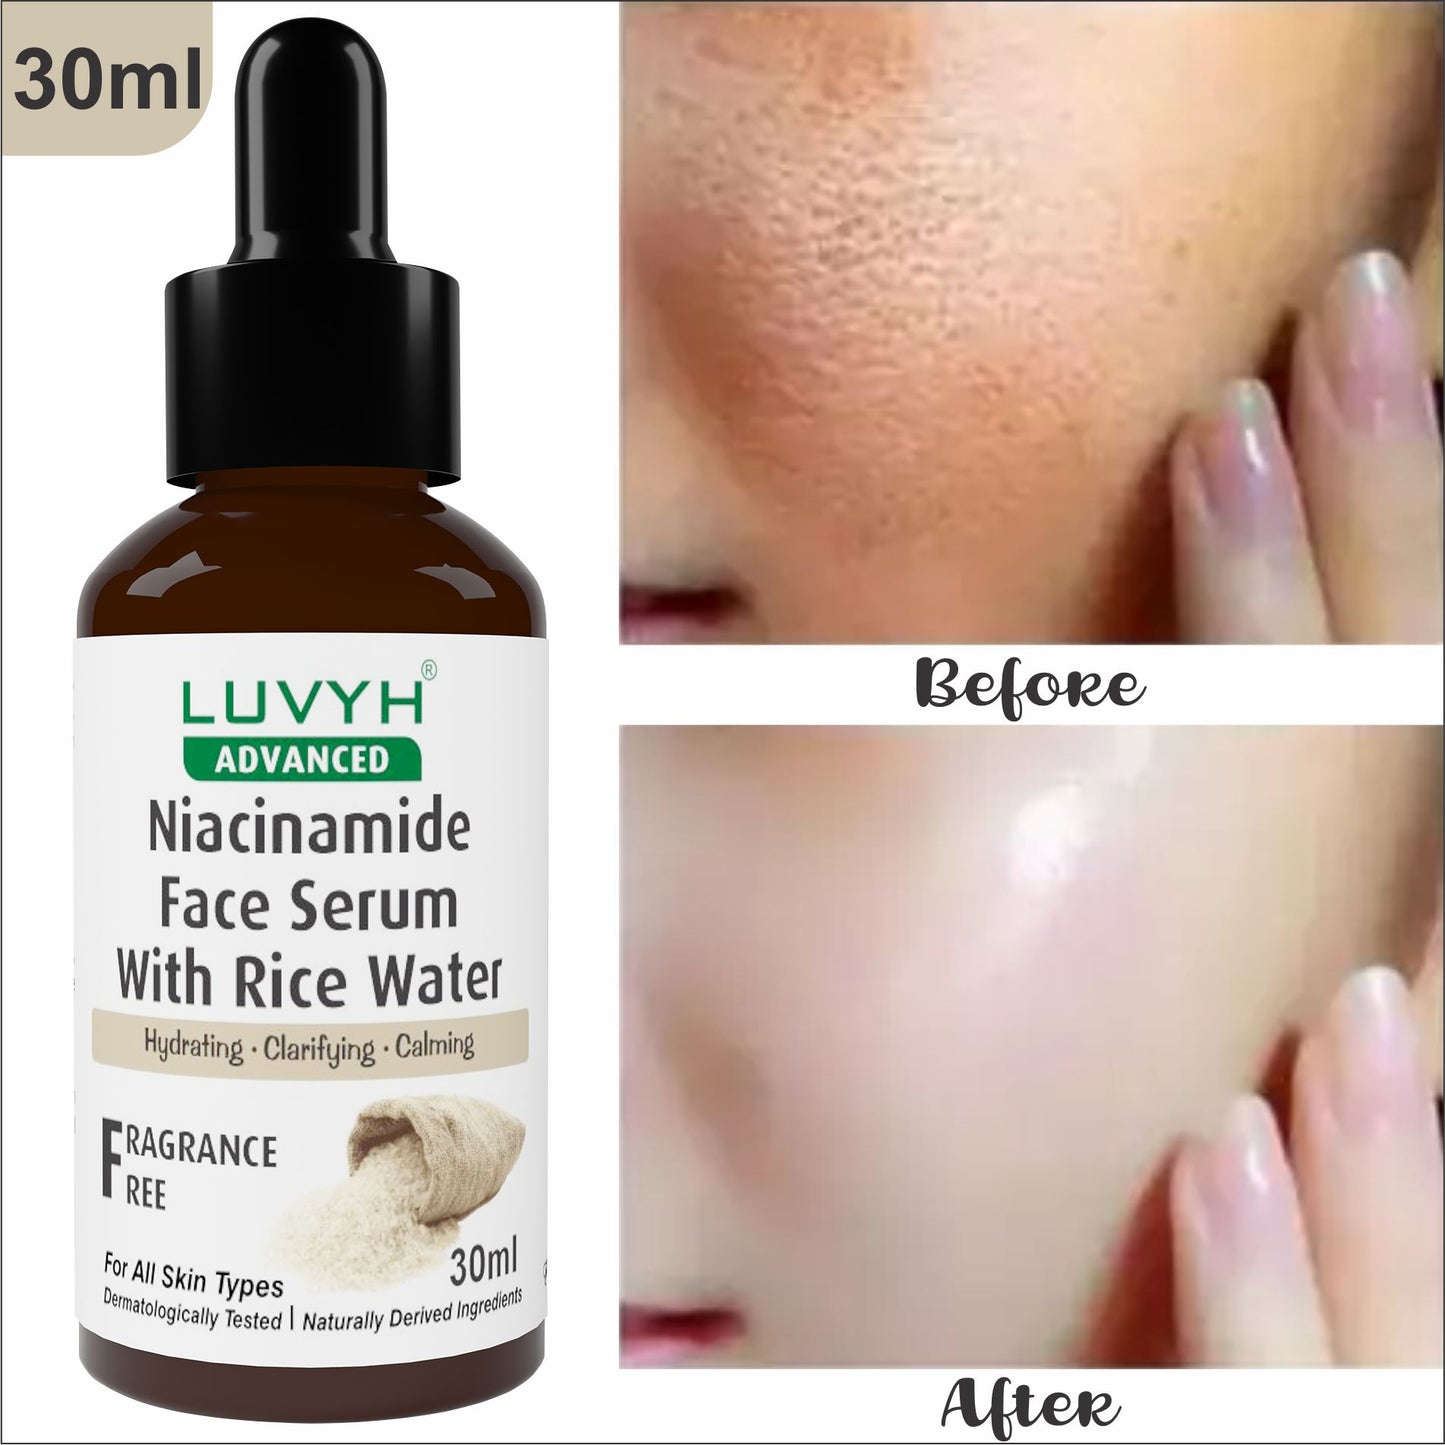 Luvyh Niacinamide Face Serum with Rice Water, Vitamin B3 with Japanese Fermented Rice Water, For Clear, Blemish-Free, Bright Skin, Suits All Skin Types, Fragrance-Free 30ML